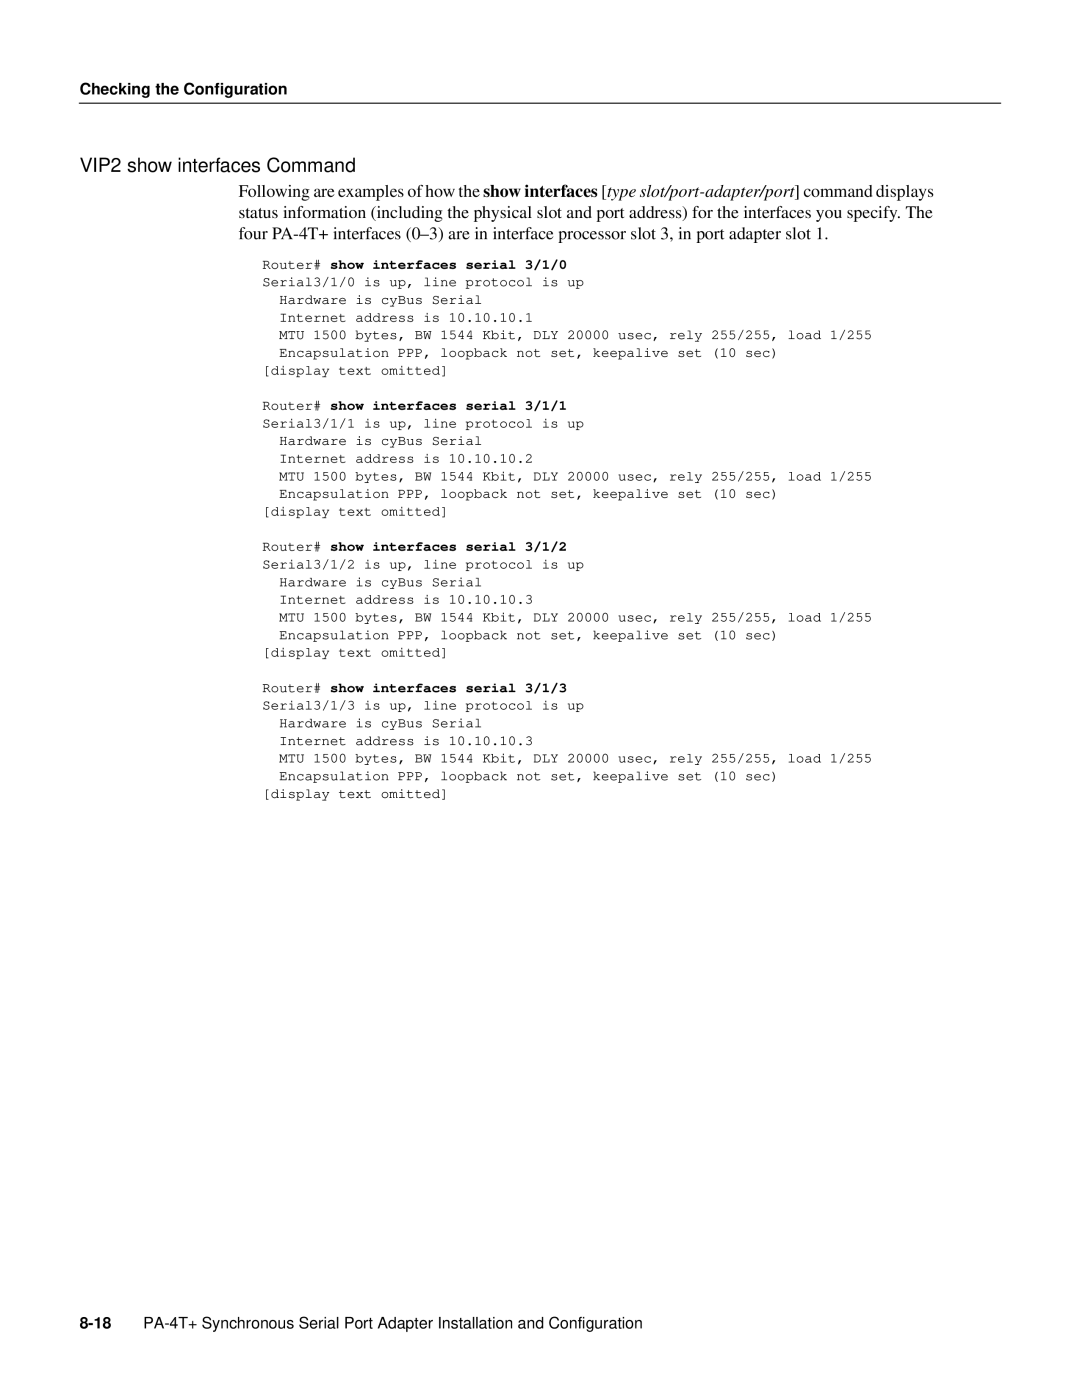 Cisco Systems PA-4T manual VIP2 show interfaces Command, Checking the Configuration 